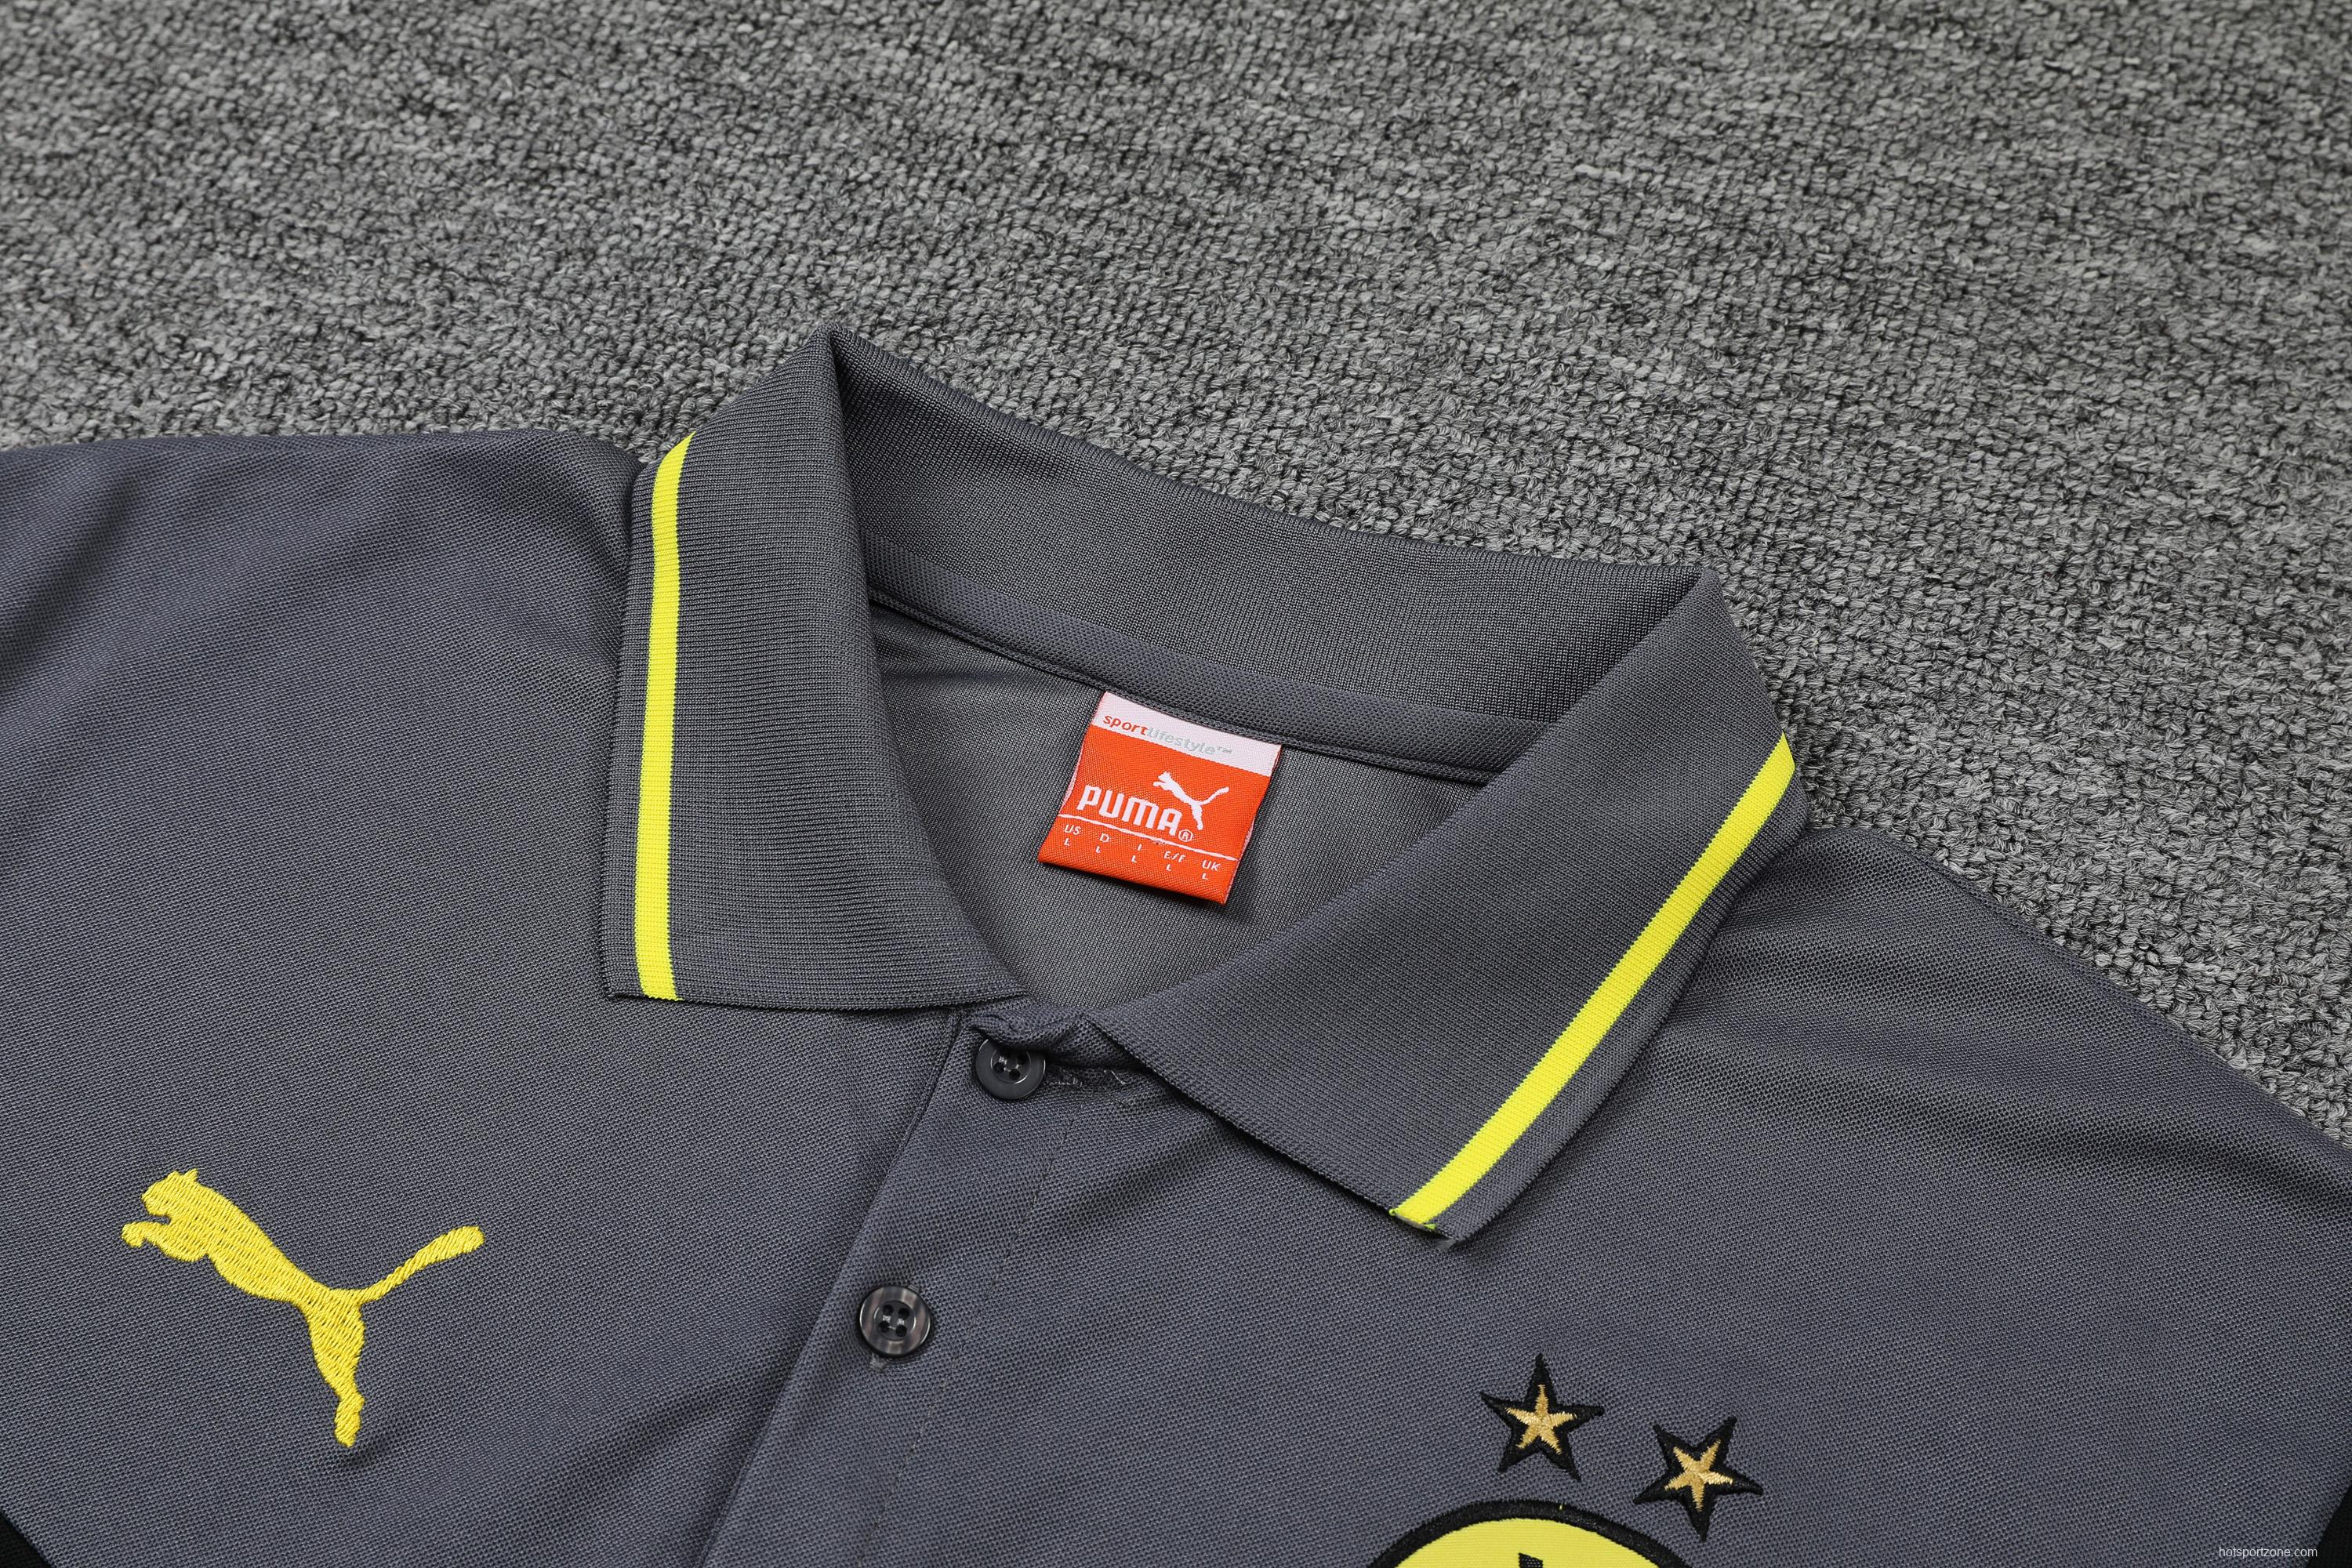 Borussia Dortmund POLO kit Grey Black (not supported to be sold separately)